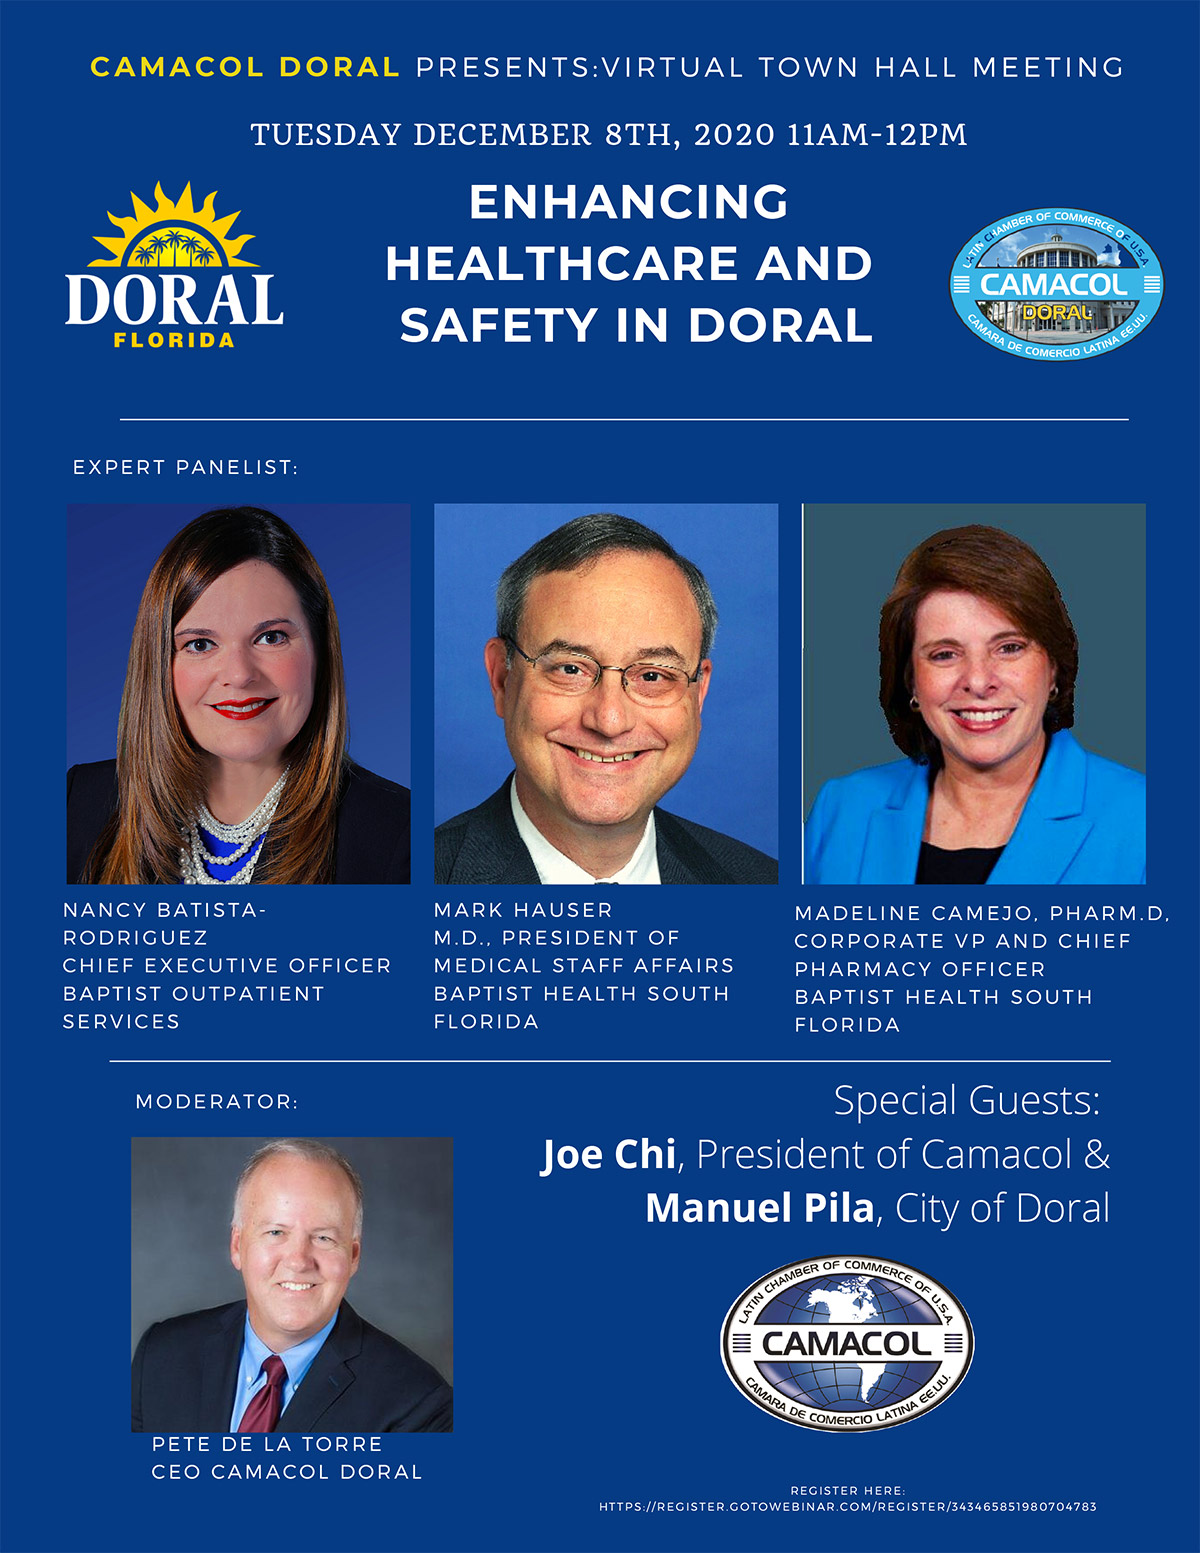 Enhancing Healthcare and Safety in Doral